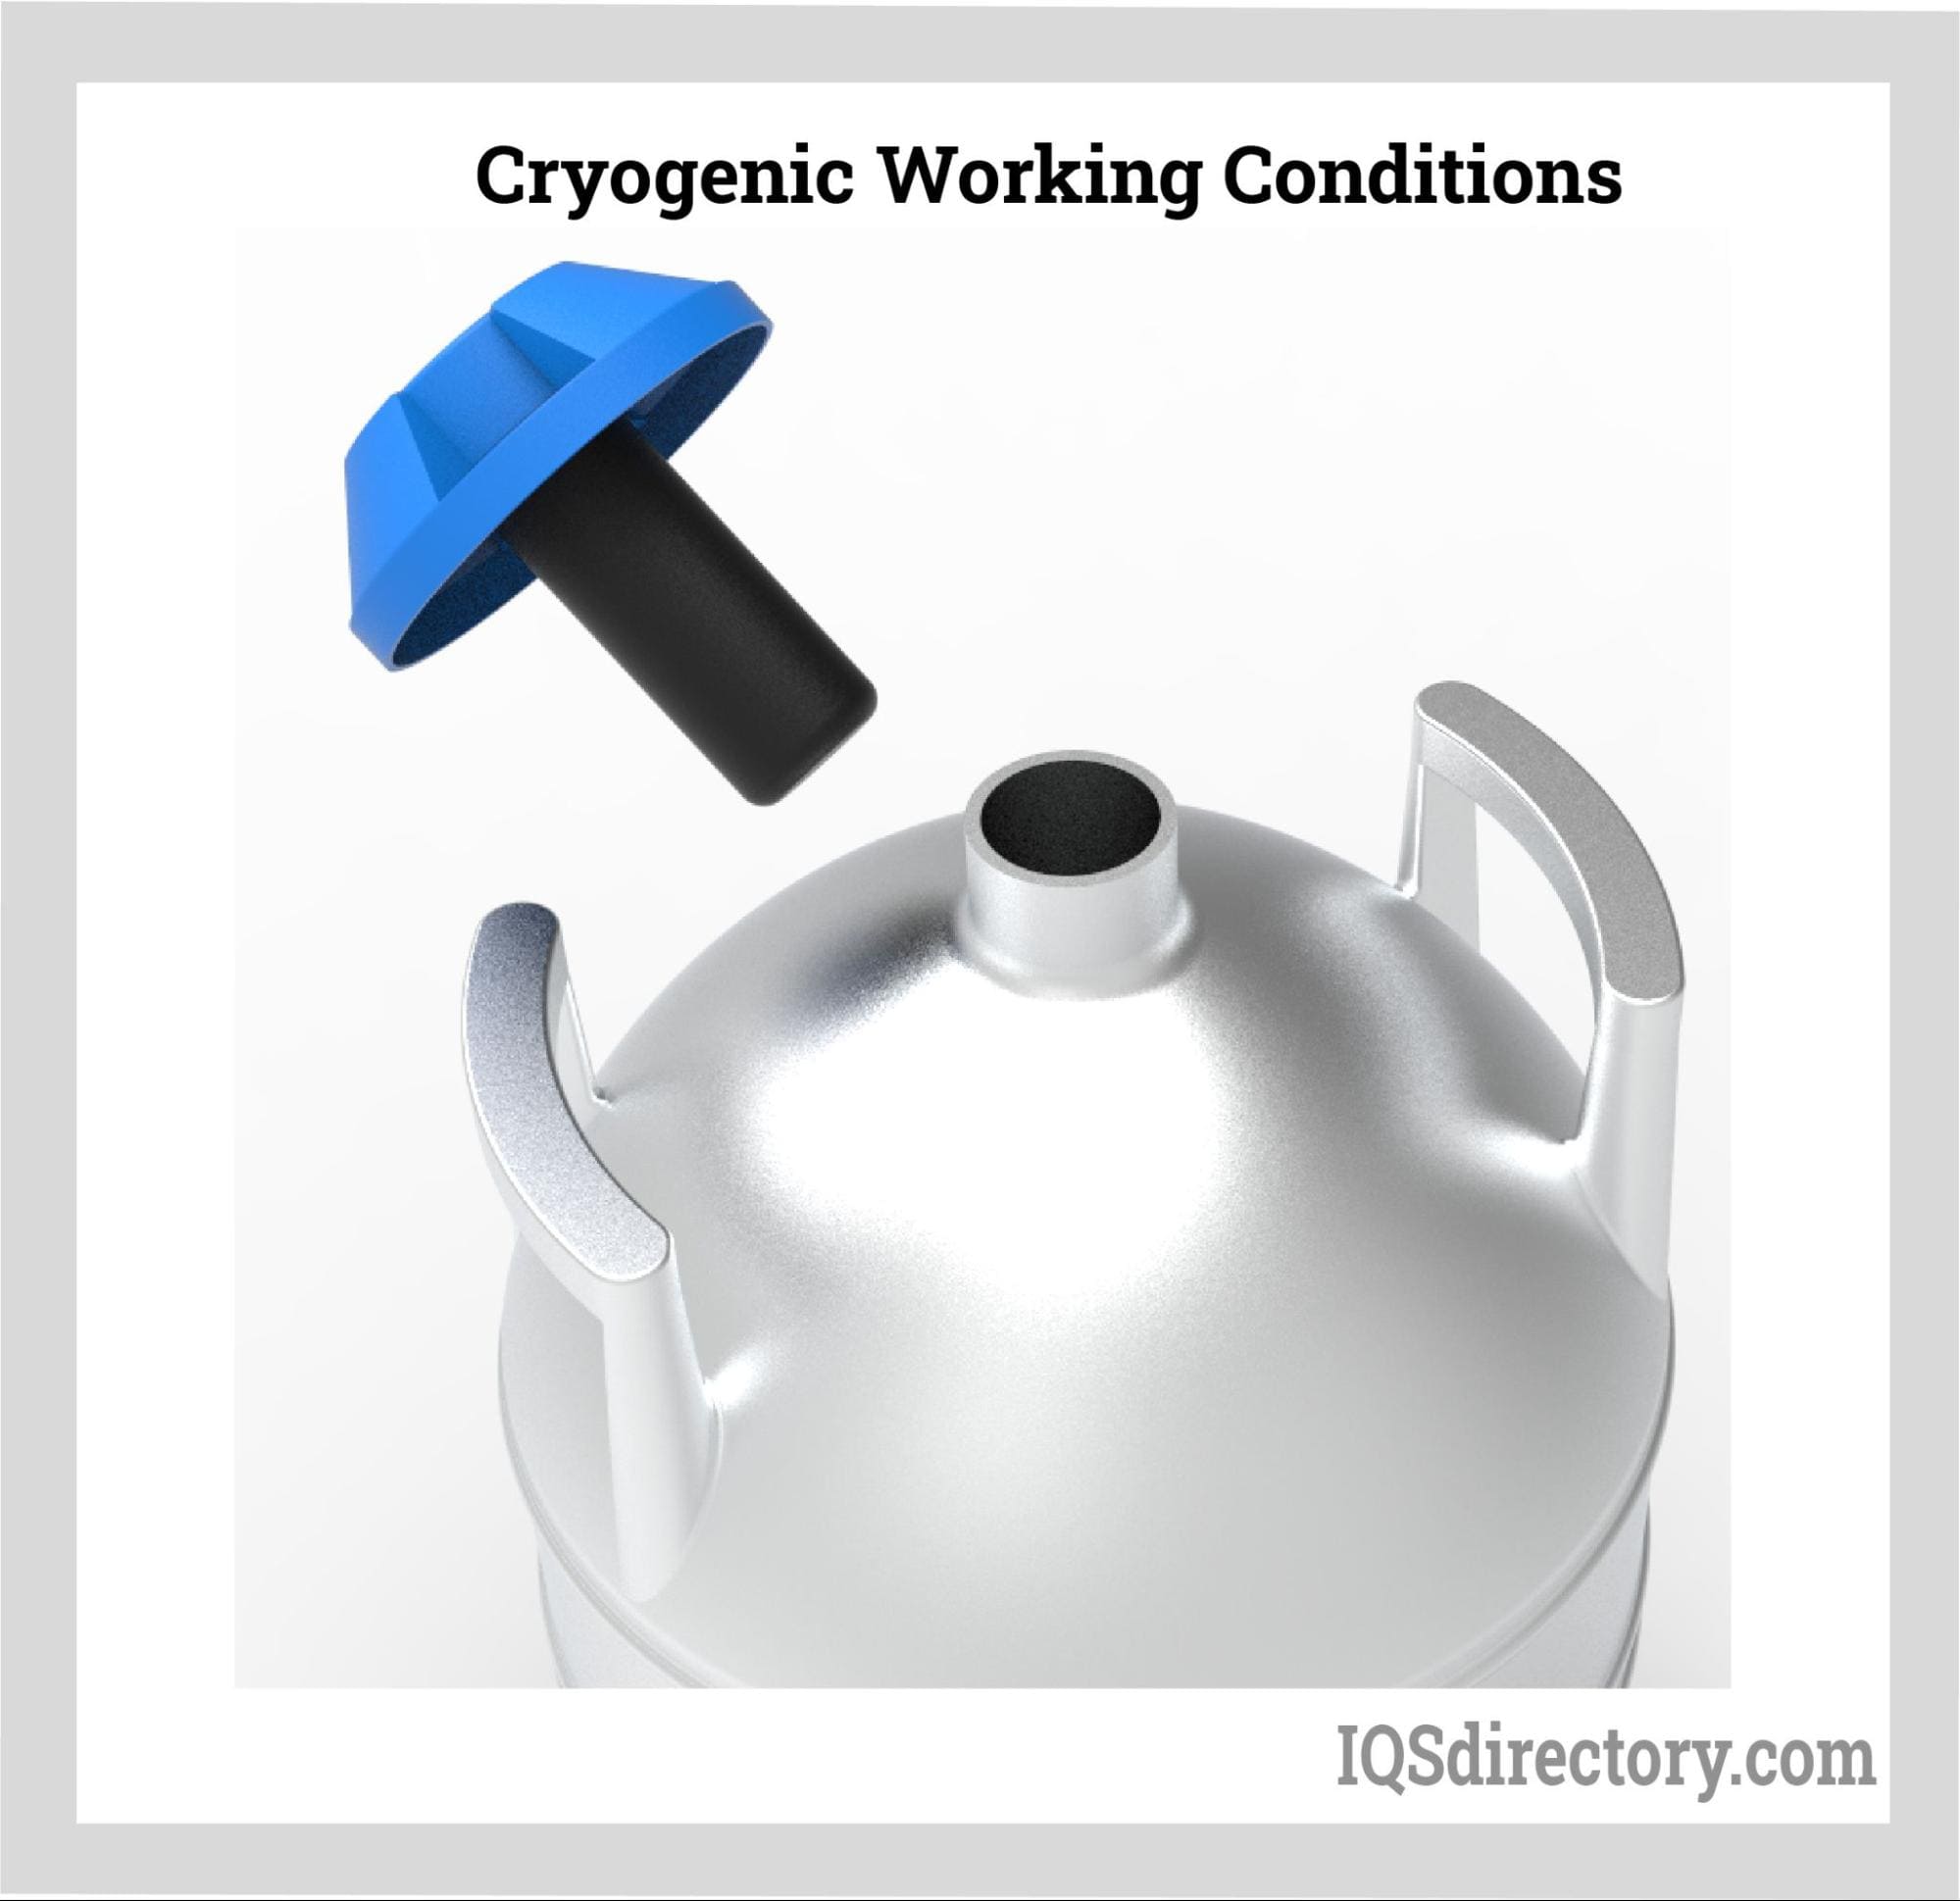 Cryogenic Working Conditions